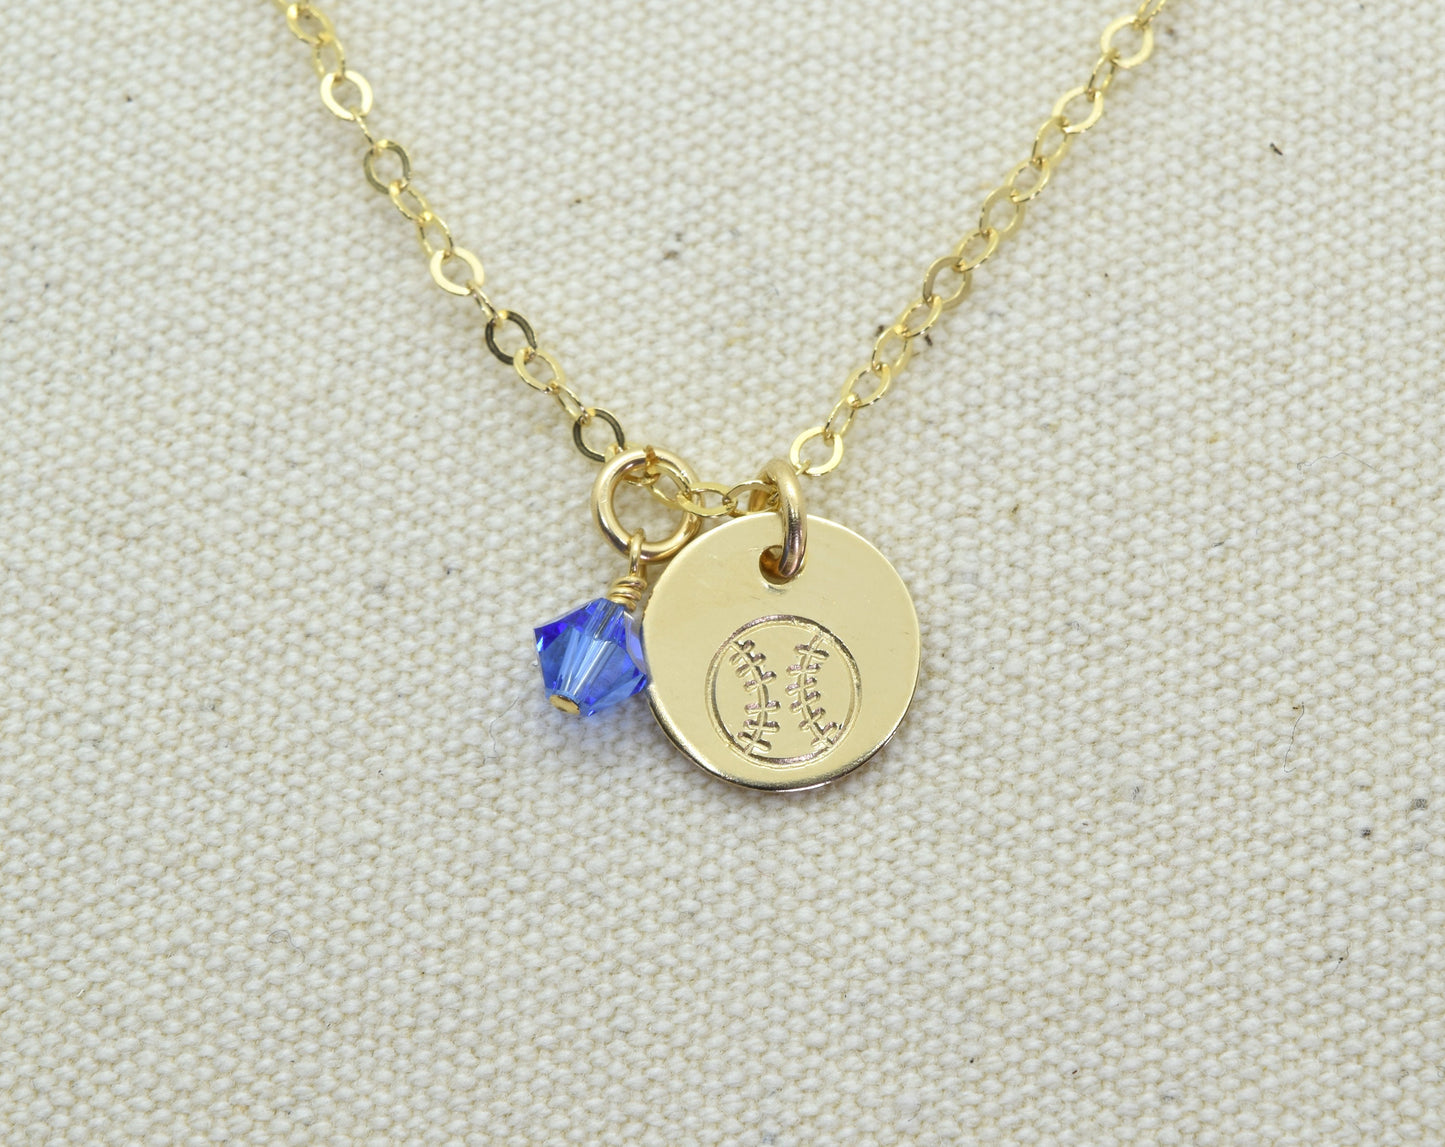 Gold Filled Softball Charm Necklace, Baseball Pendant, Sports Team Gift, Sports Mom Gift, Add Birthstone or Team Colors